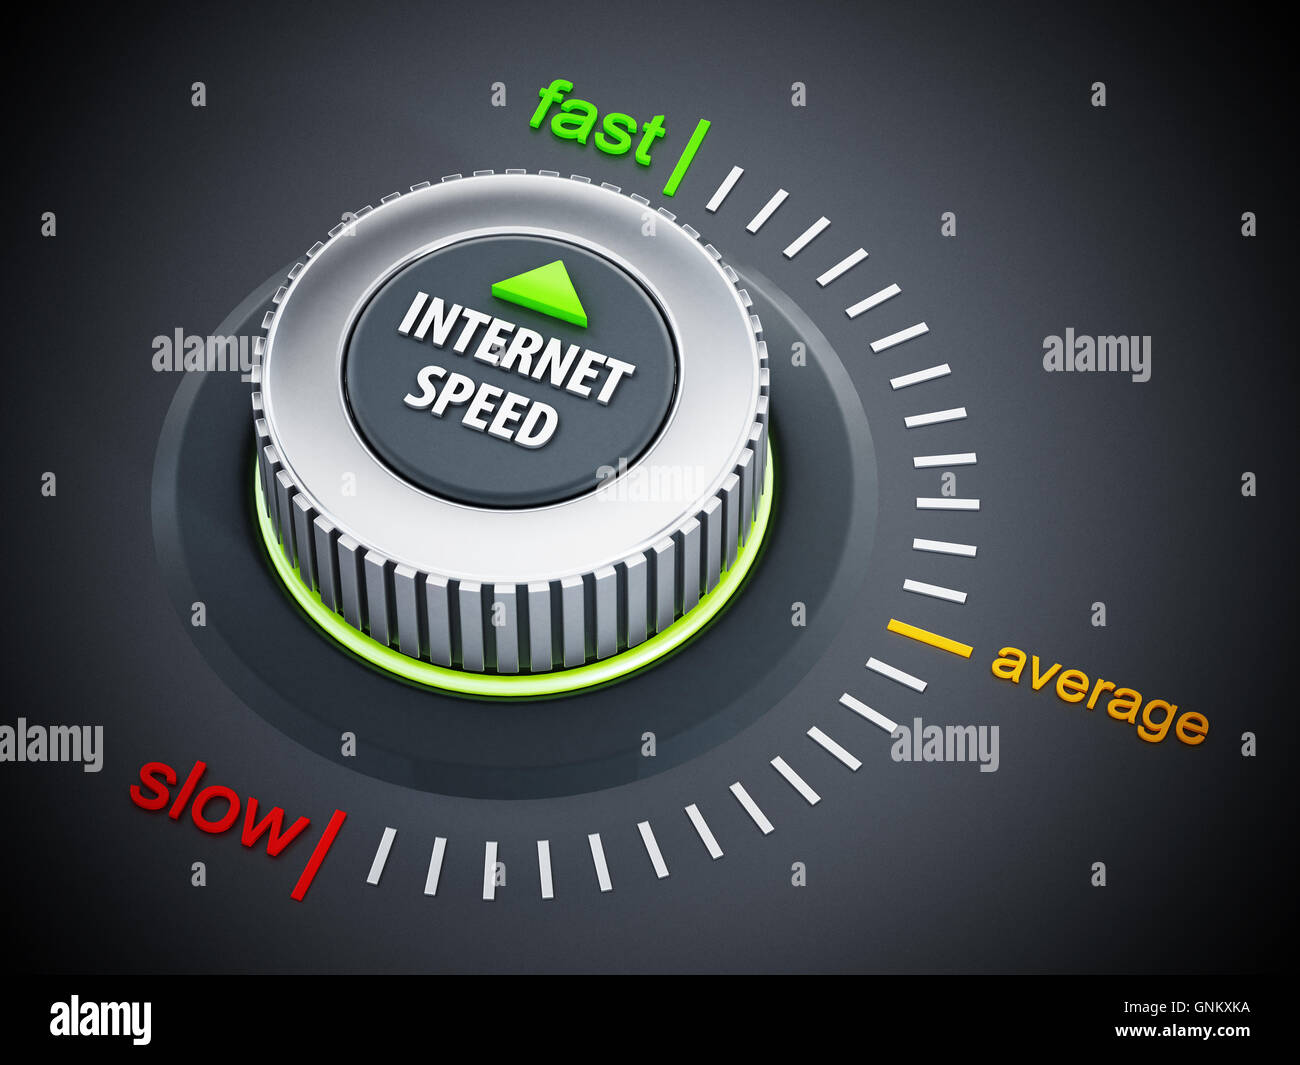 Internet speed dial button pointing fast. 3D illustration. Stock Photo